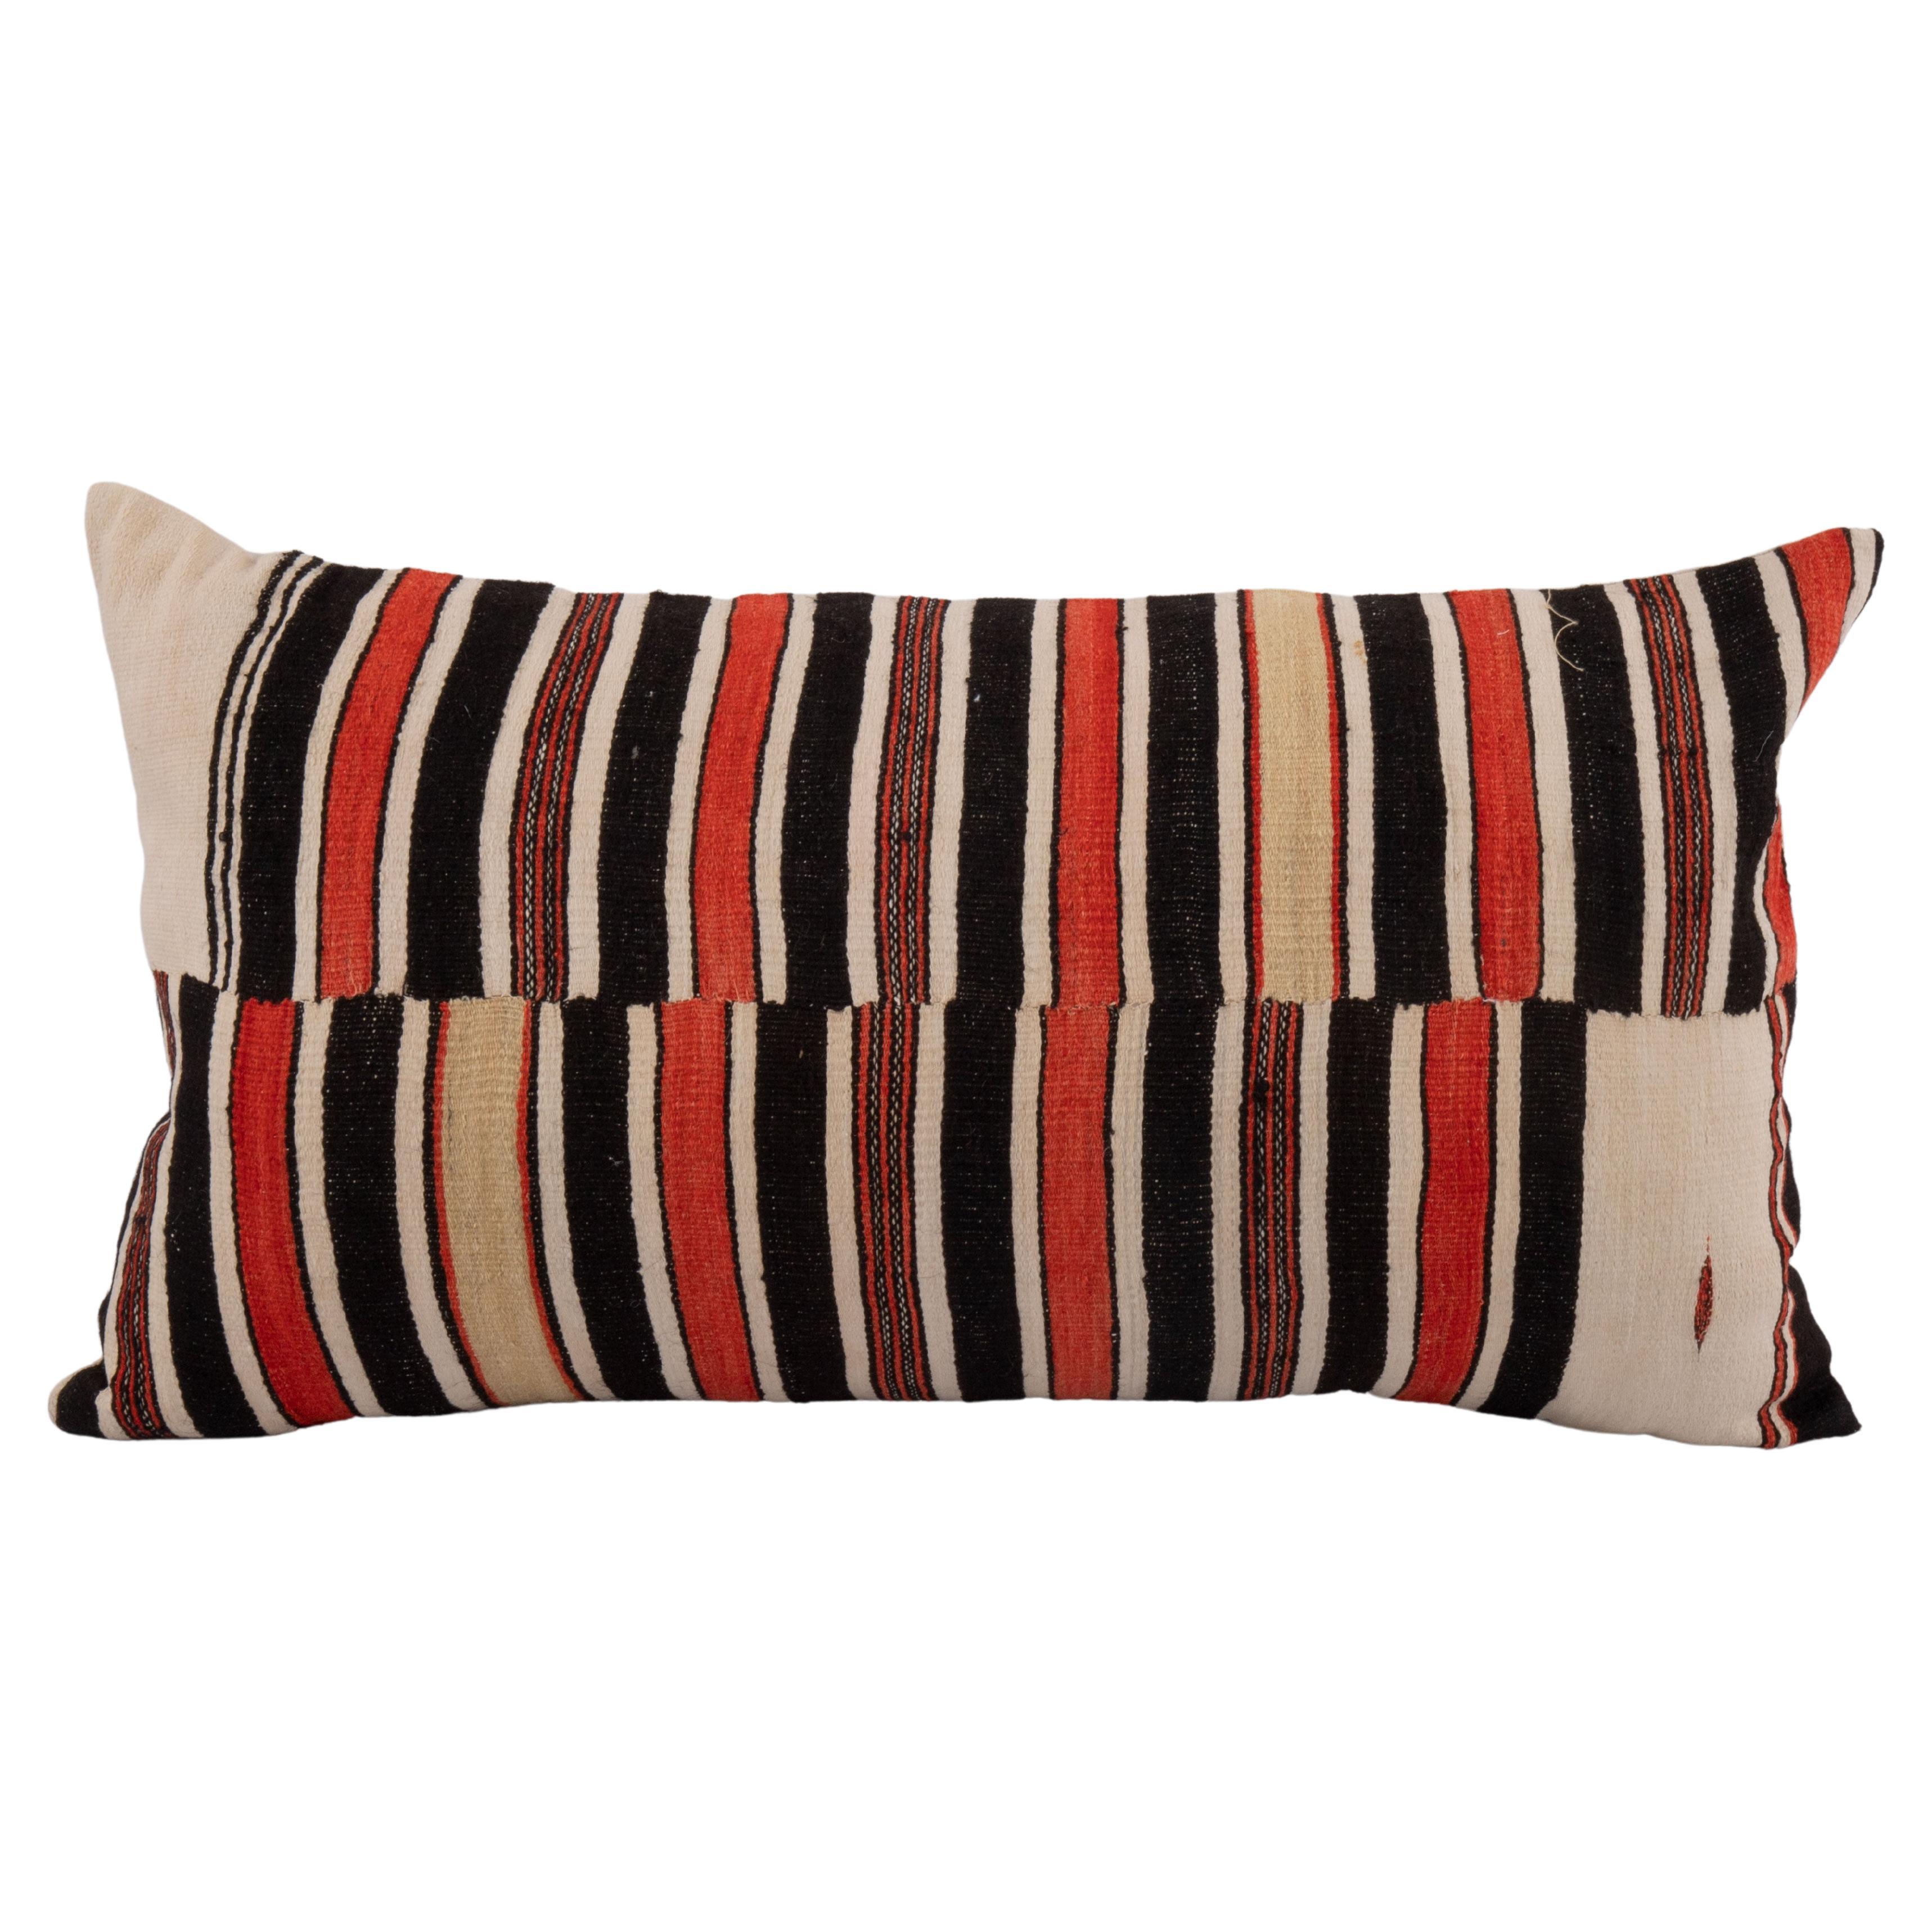  Pillow Cover Made from a Vintage West African Fulani Blanket For Sale